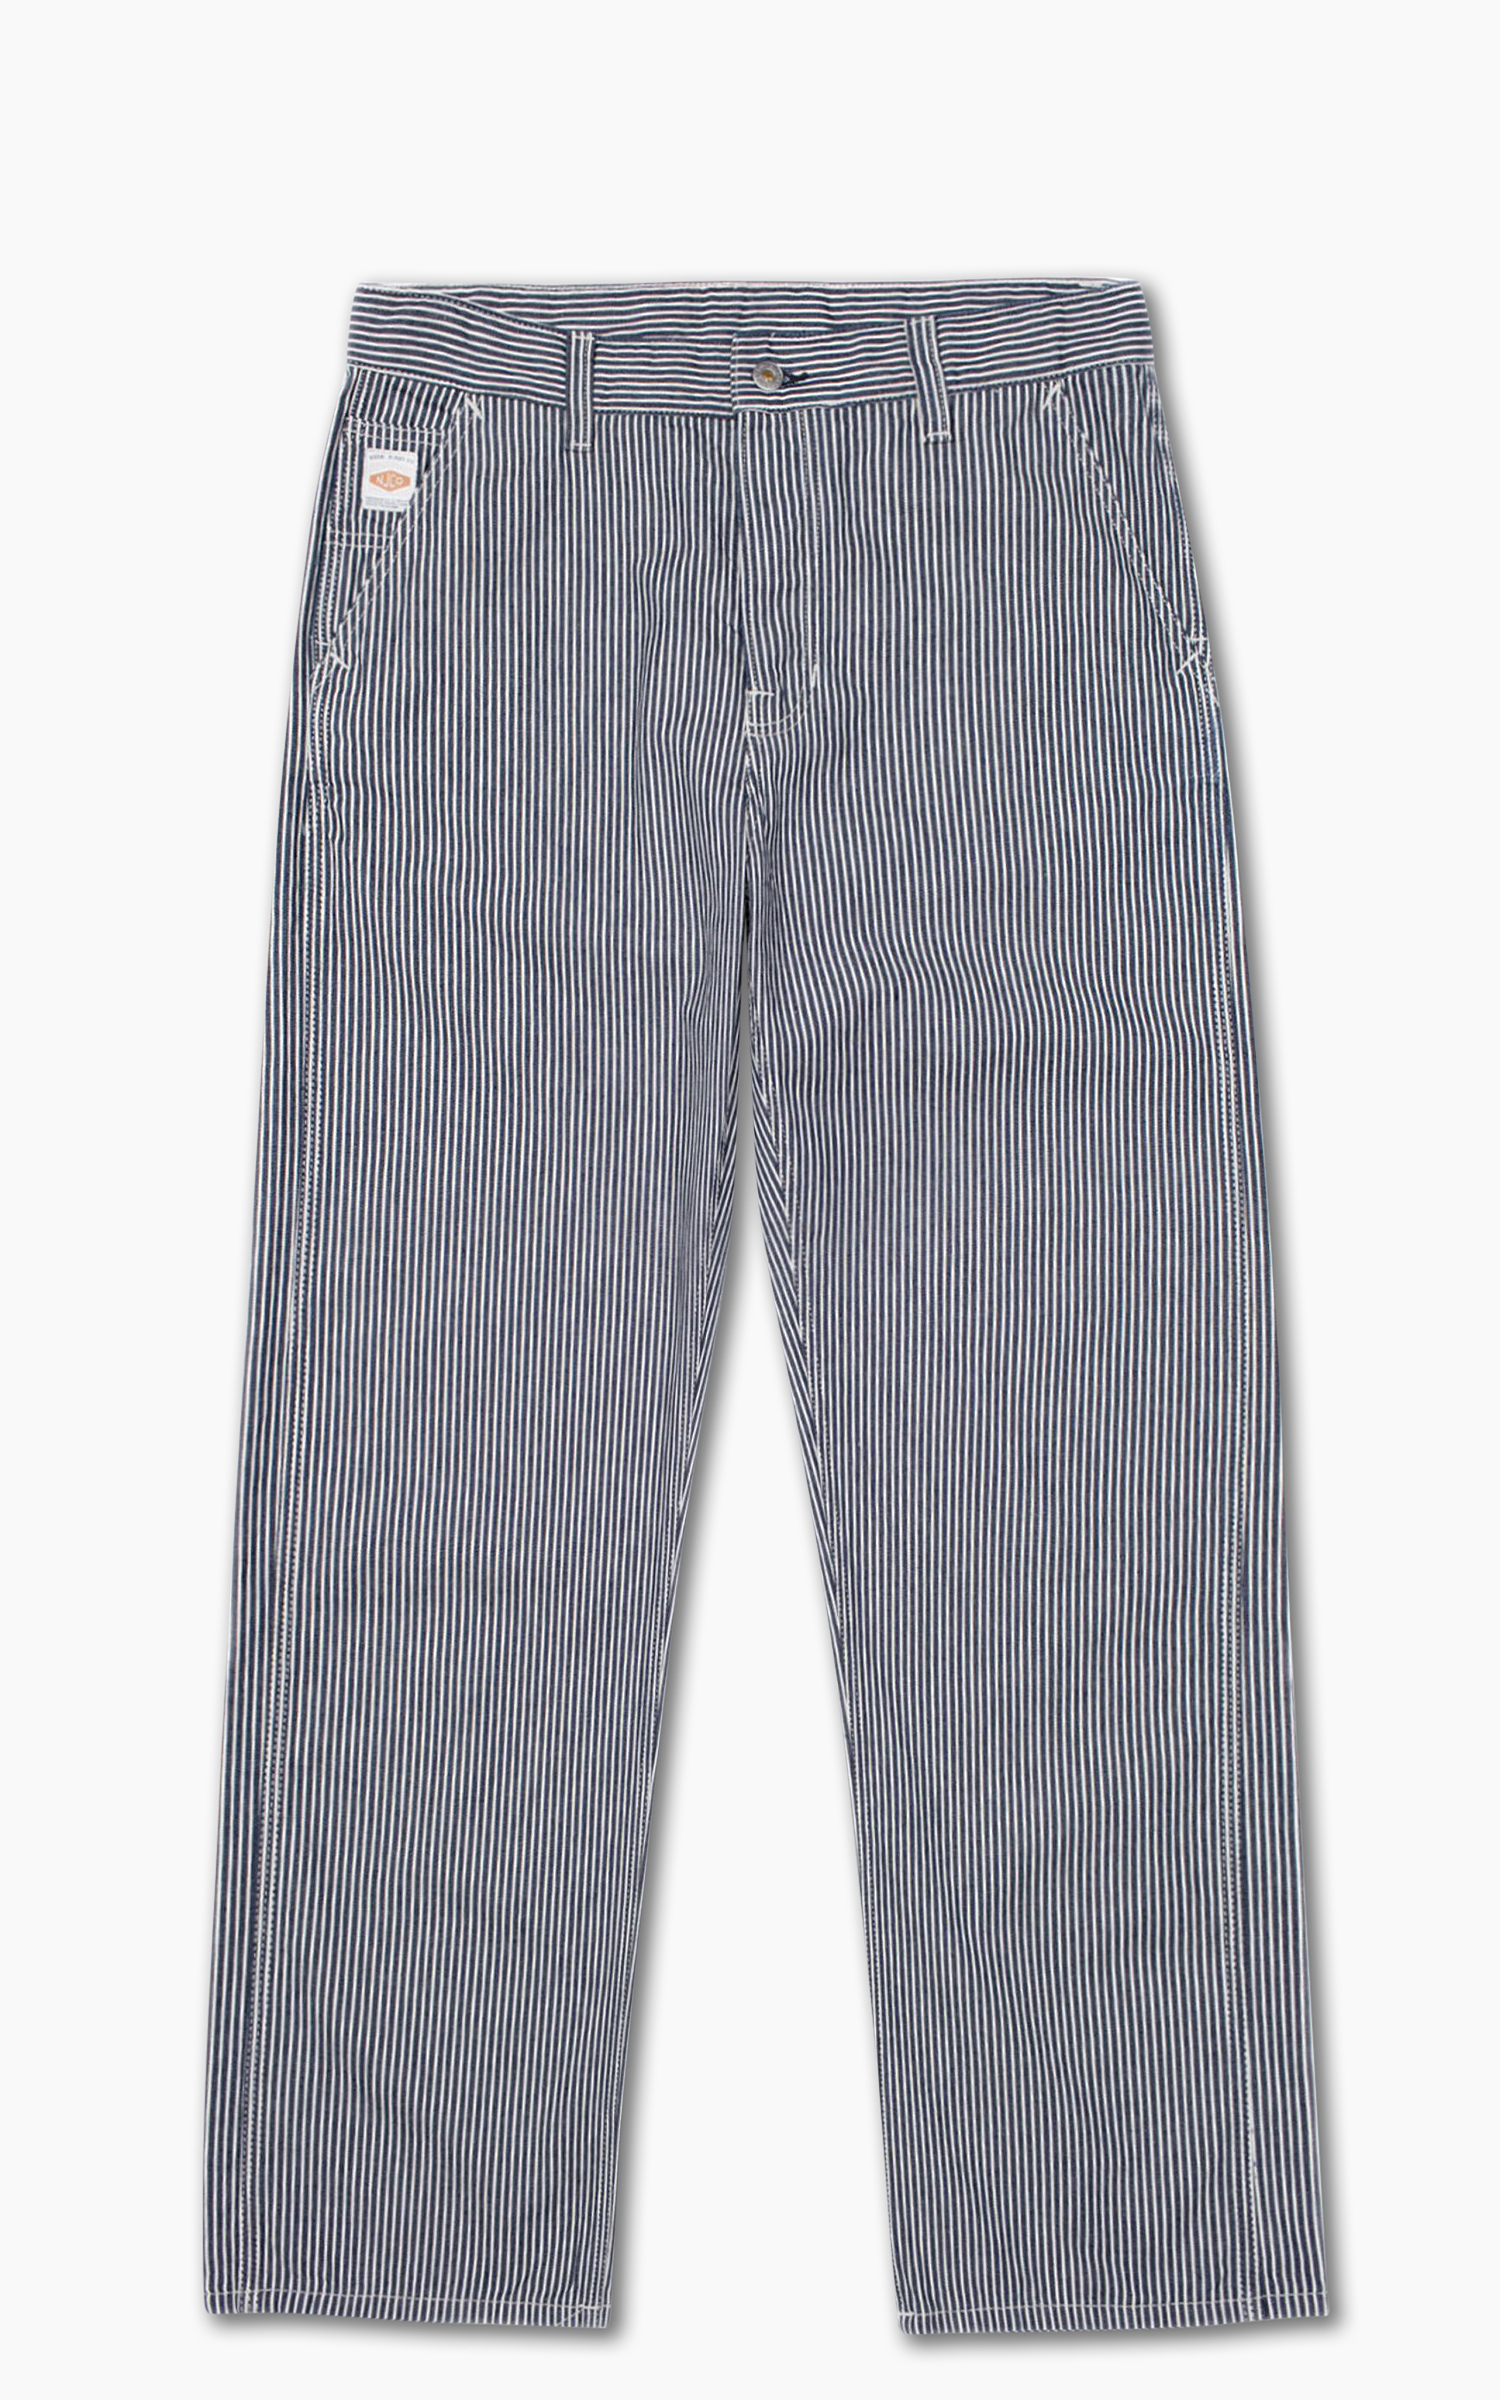 Nudie Jeans Tuff Tony Hickory Pants | Cultizm